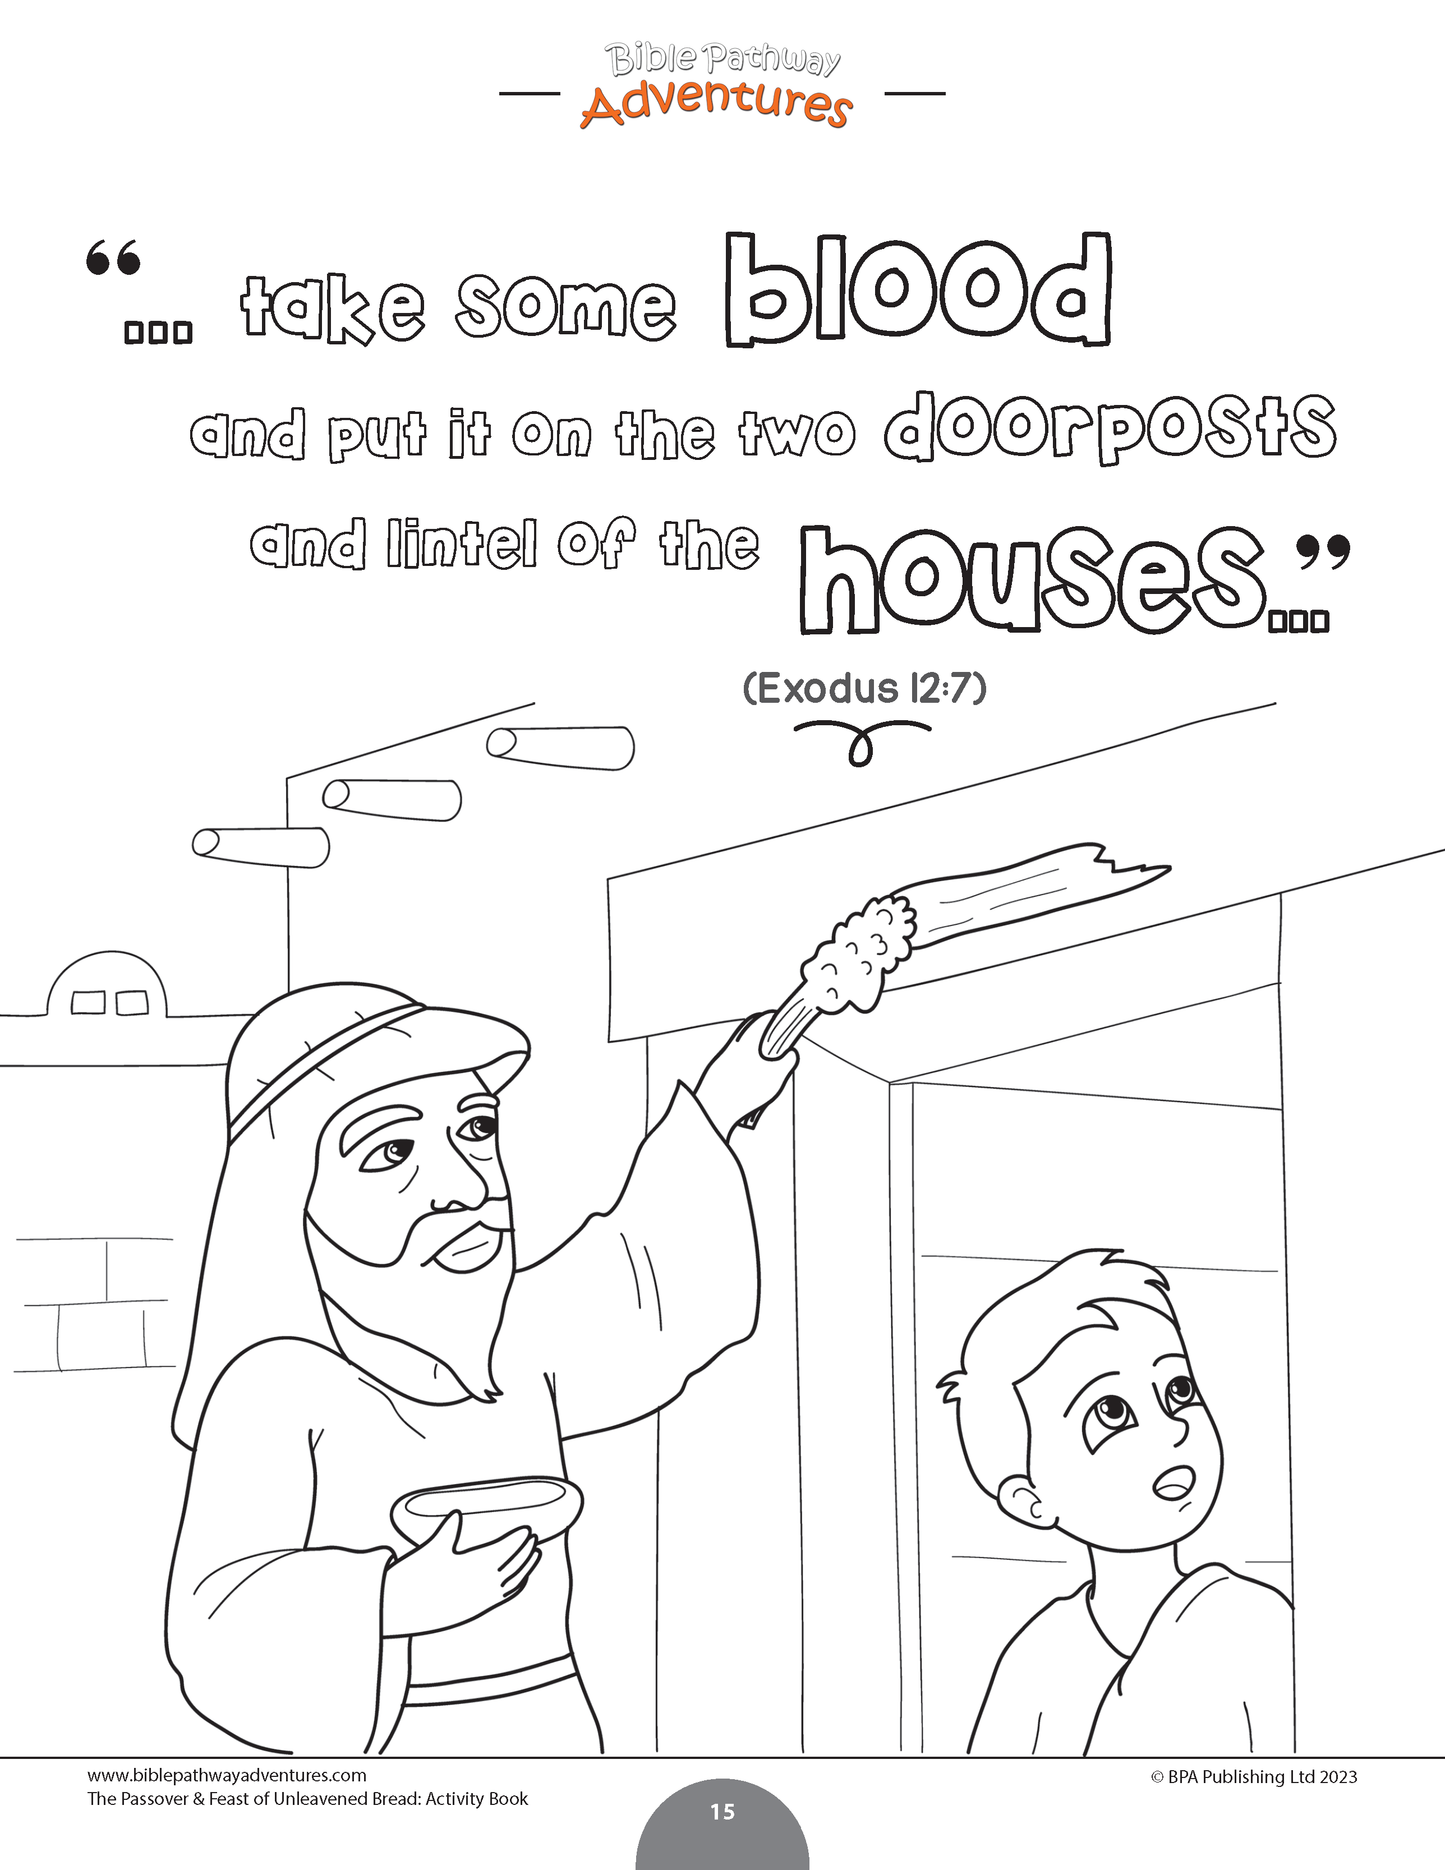 The Passover & Feast of Unleavened Bread Activity Book (PDF)